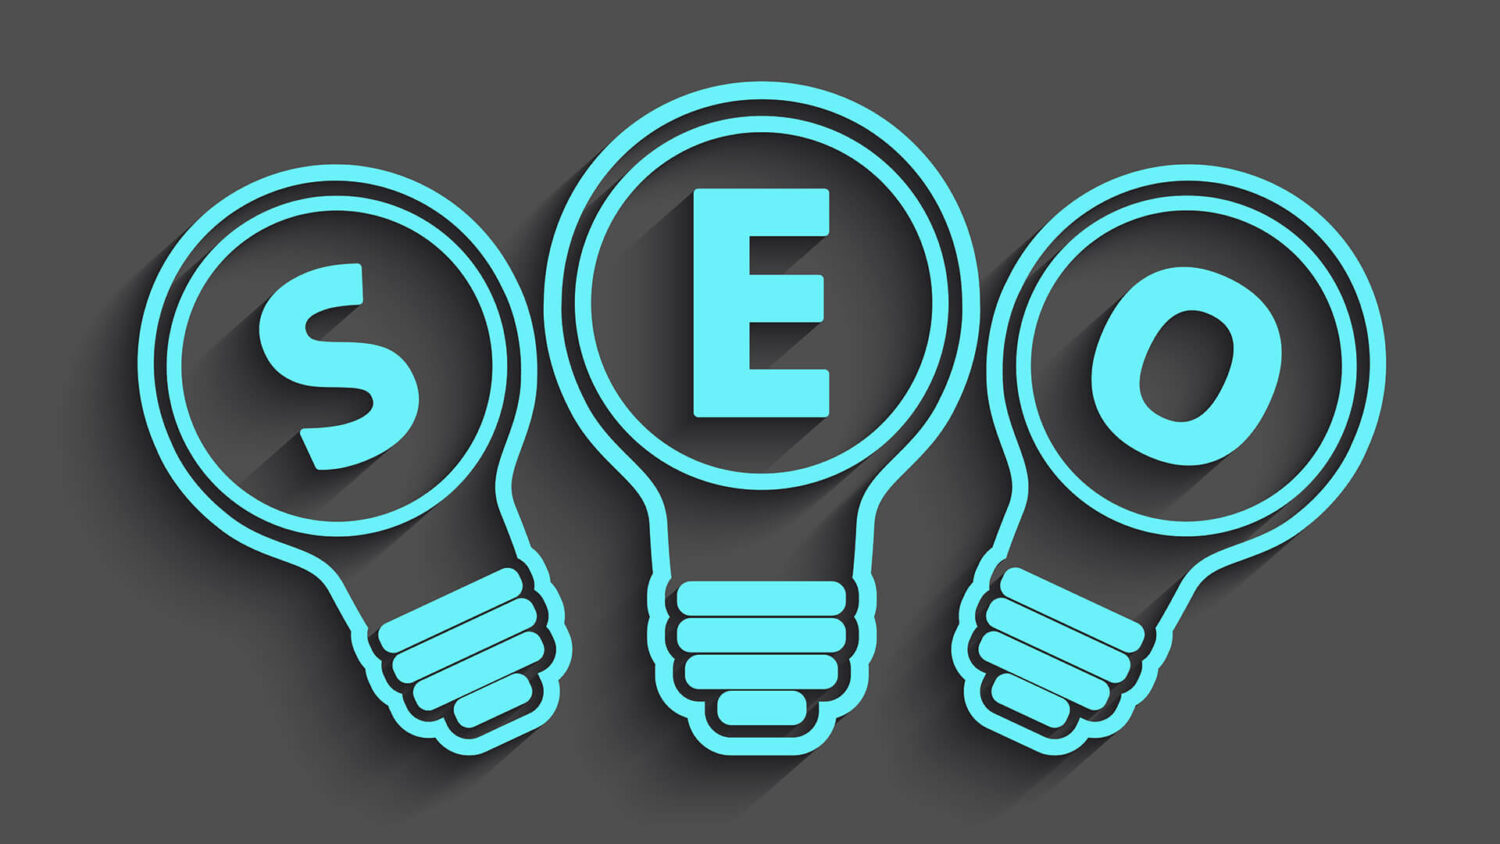 SEO and its effects on businesses